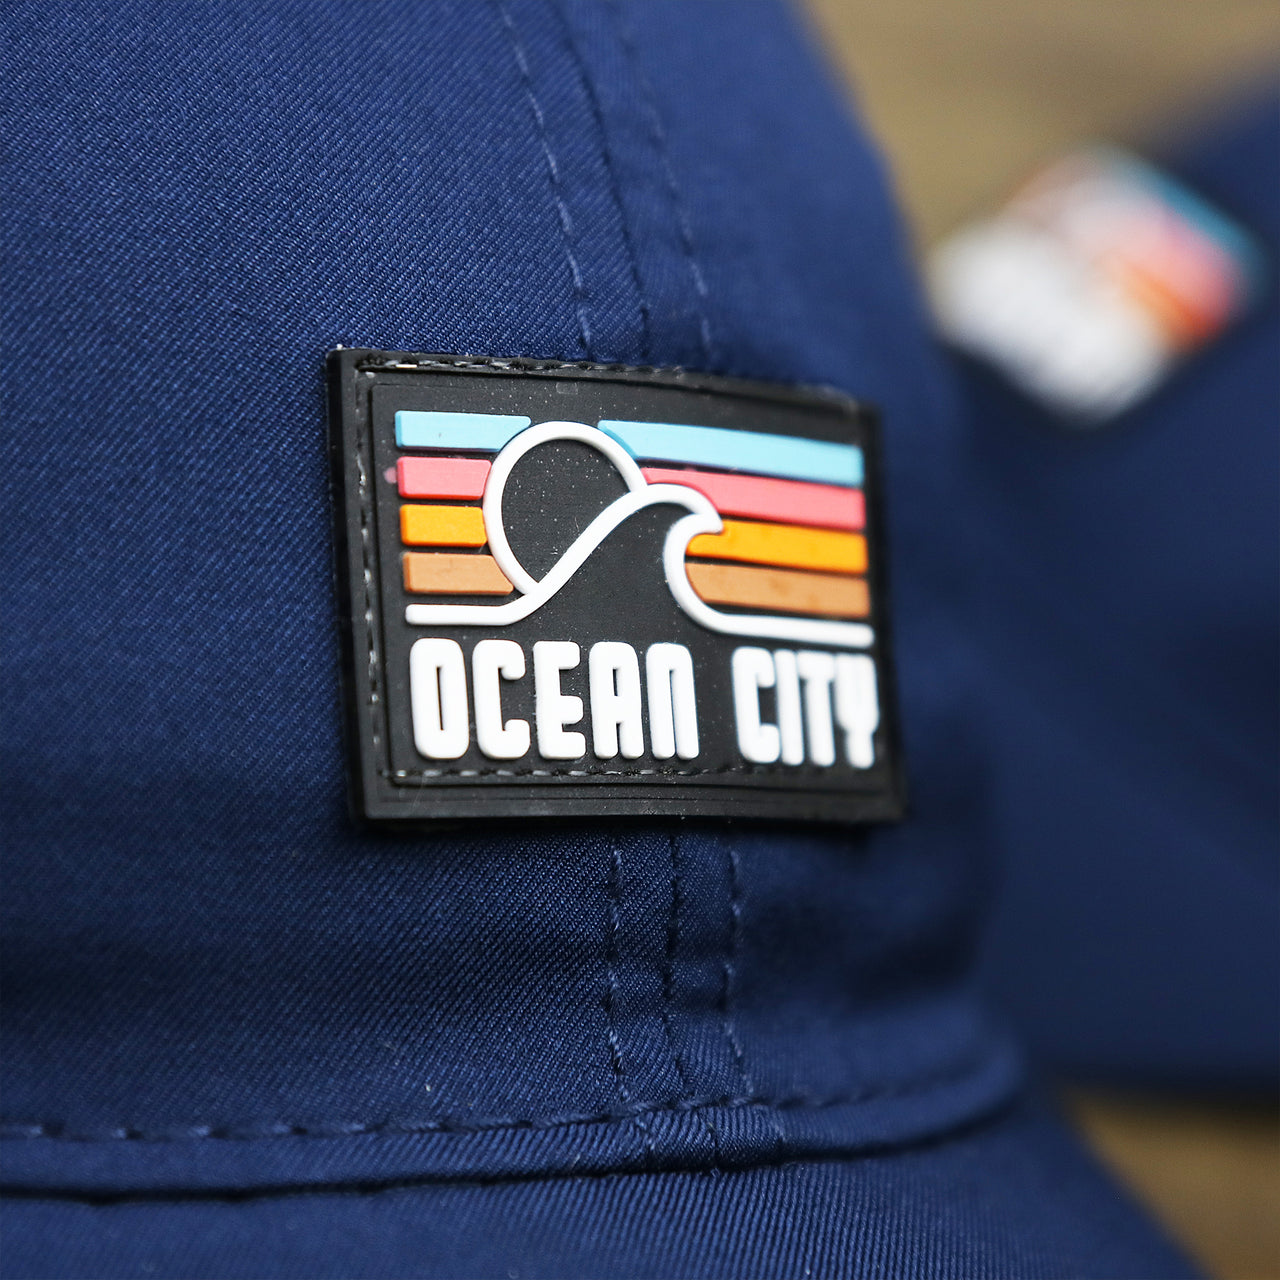 The Ocean City Sunset Rubber Patch on the New Jersey High Point PVC Ocean City Rubber Patch Cool Fit Adjustable Dad Hat | Navy Blue Dad Hat